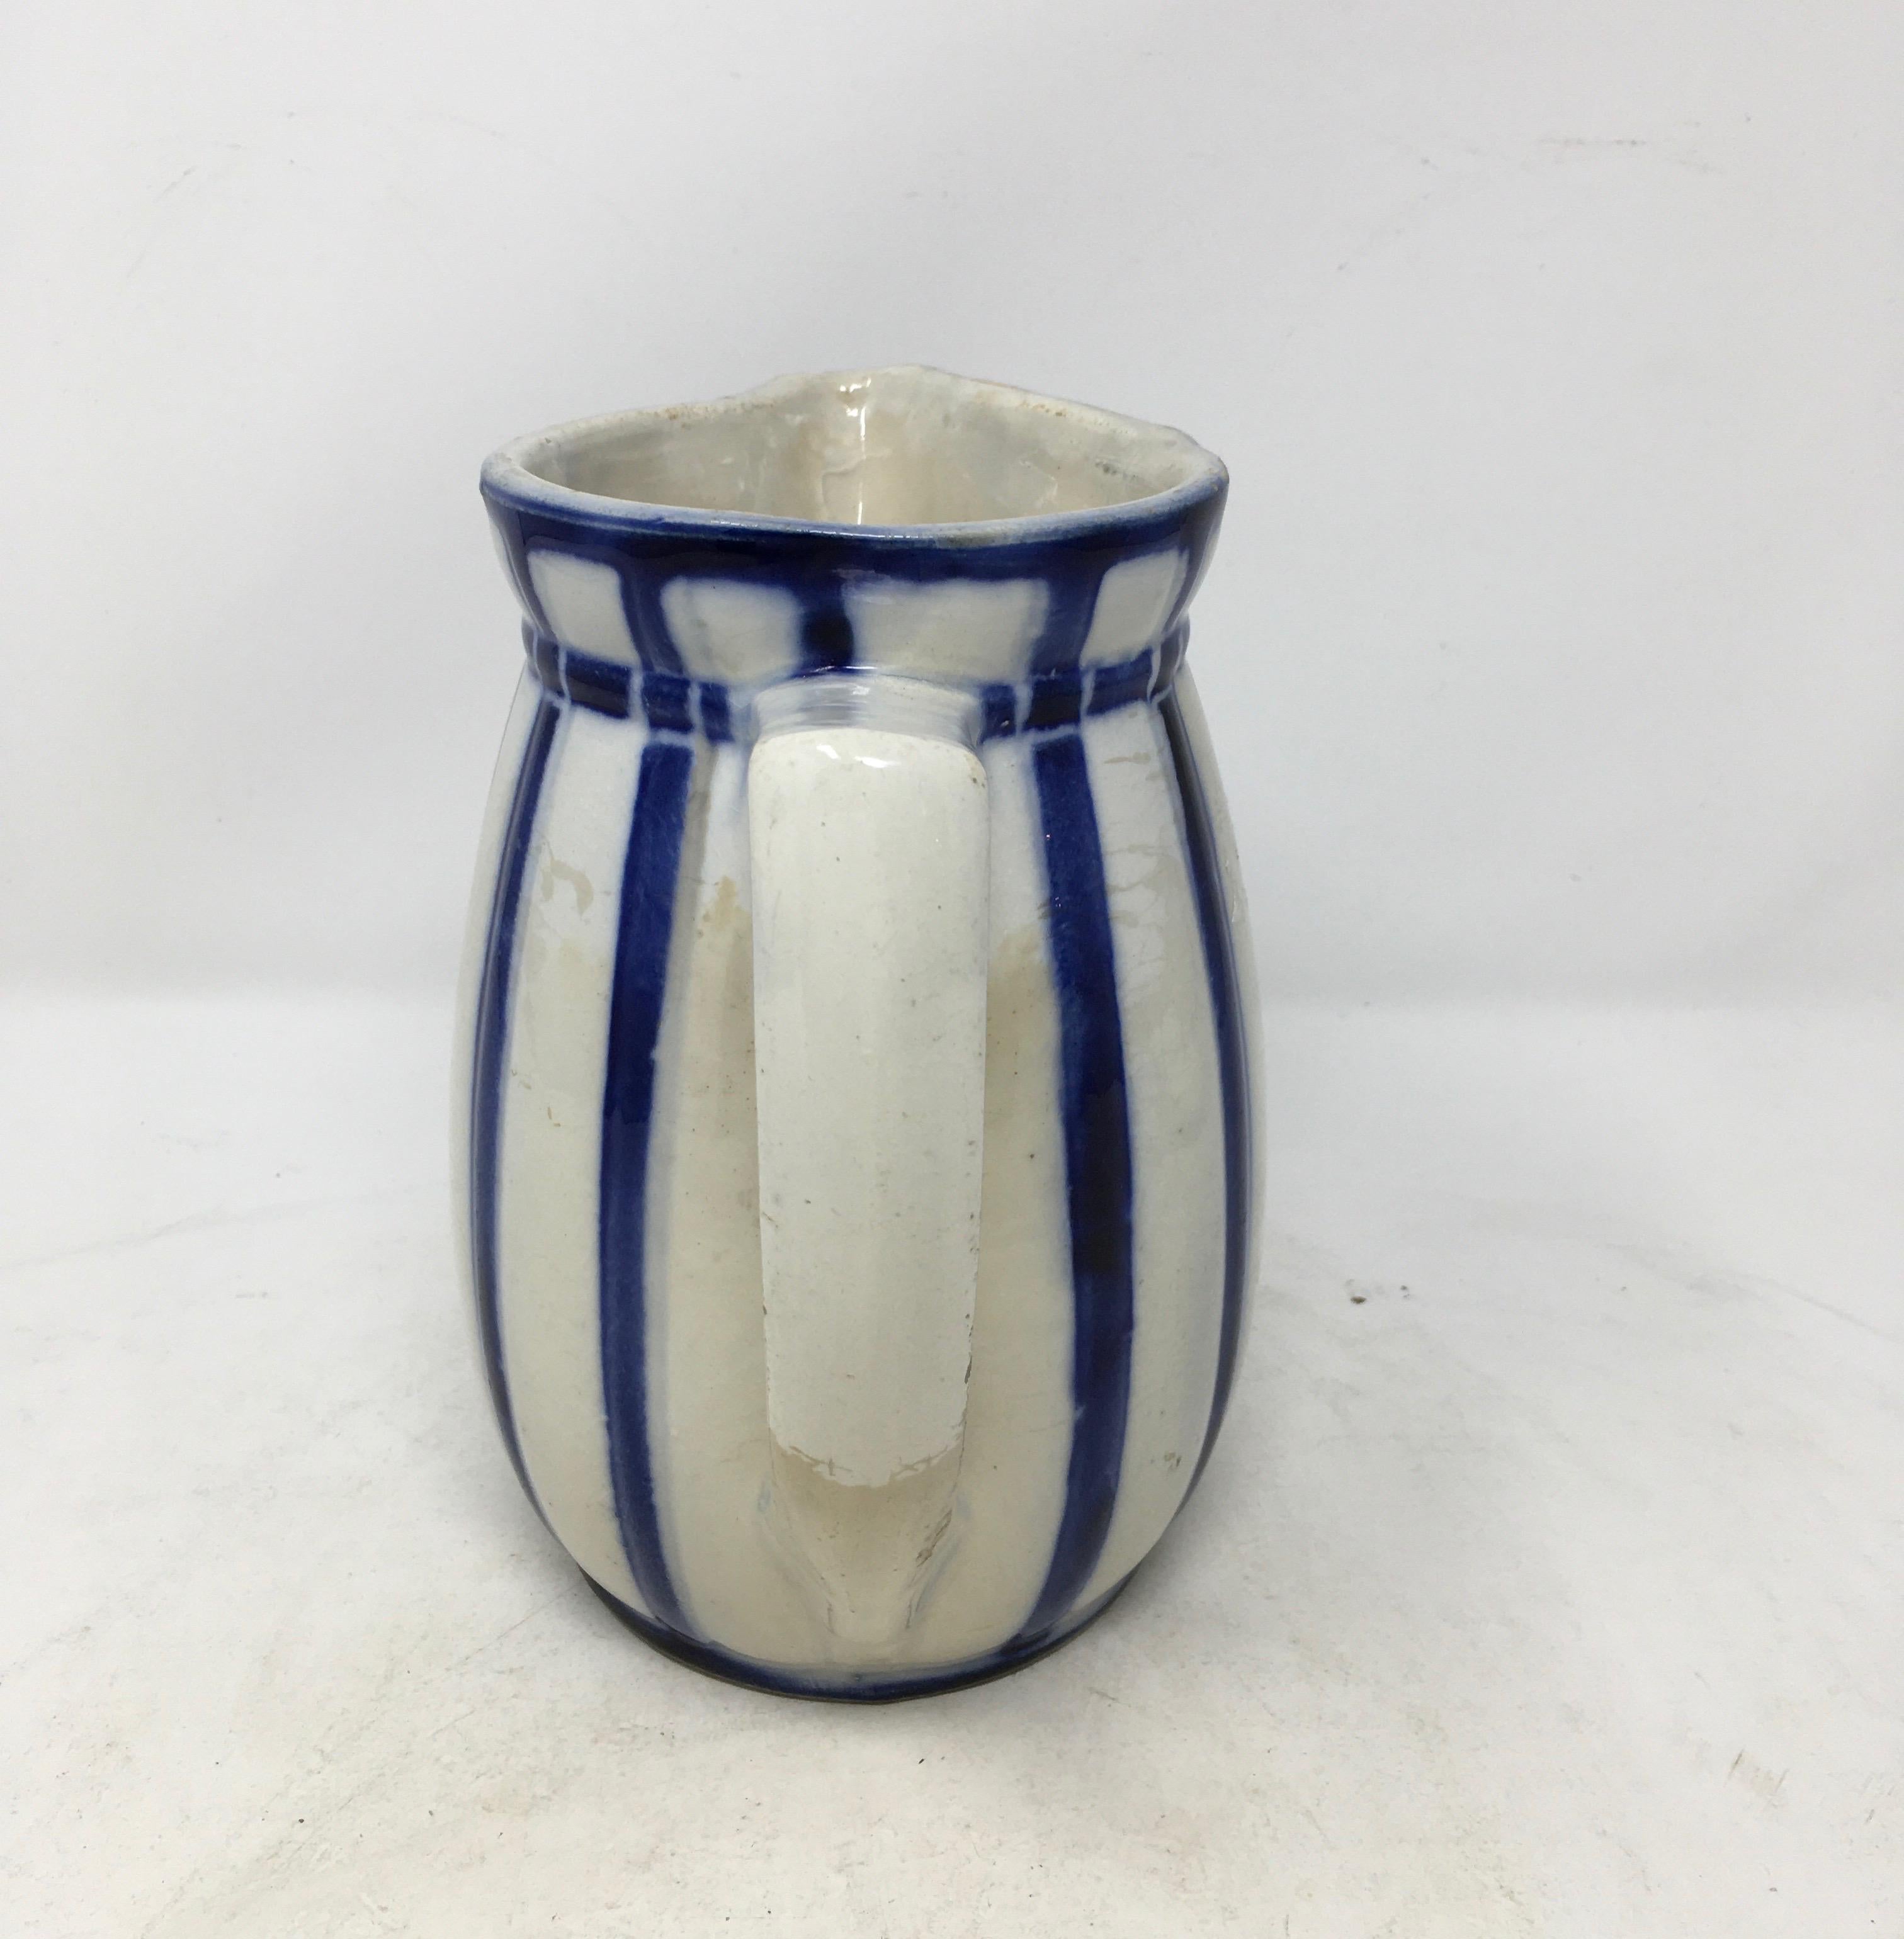 This graceful white pitcher has a slightly ridged body, accented by cobalt blue stripes at about one inch intervals. Perfect for milk, or lovely with a flower, this would be a pleasant addition to any kitchen.

This piece weighs 1.5 lbs.